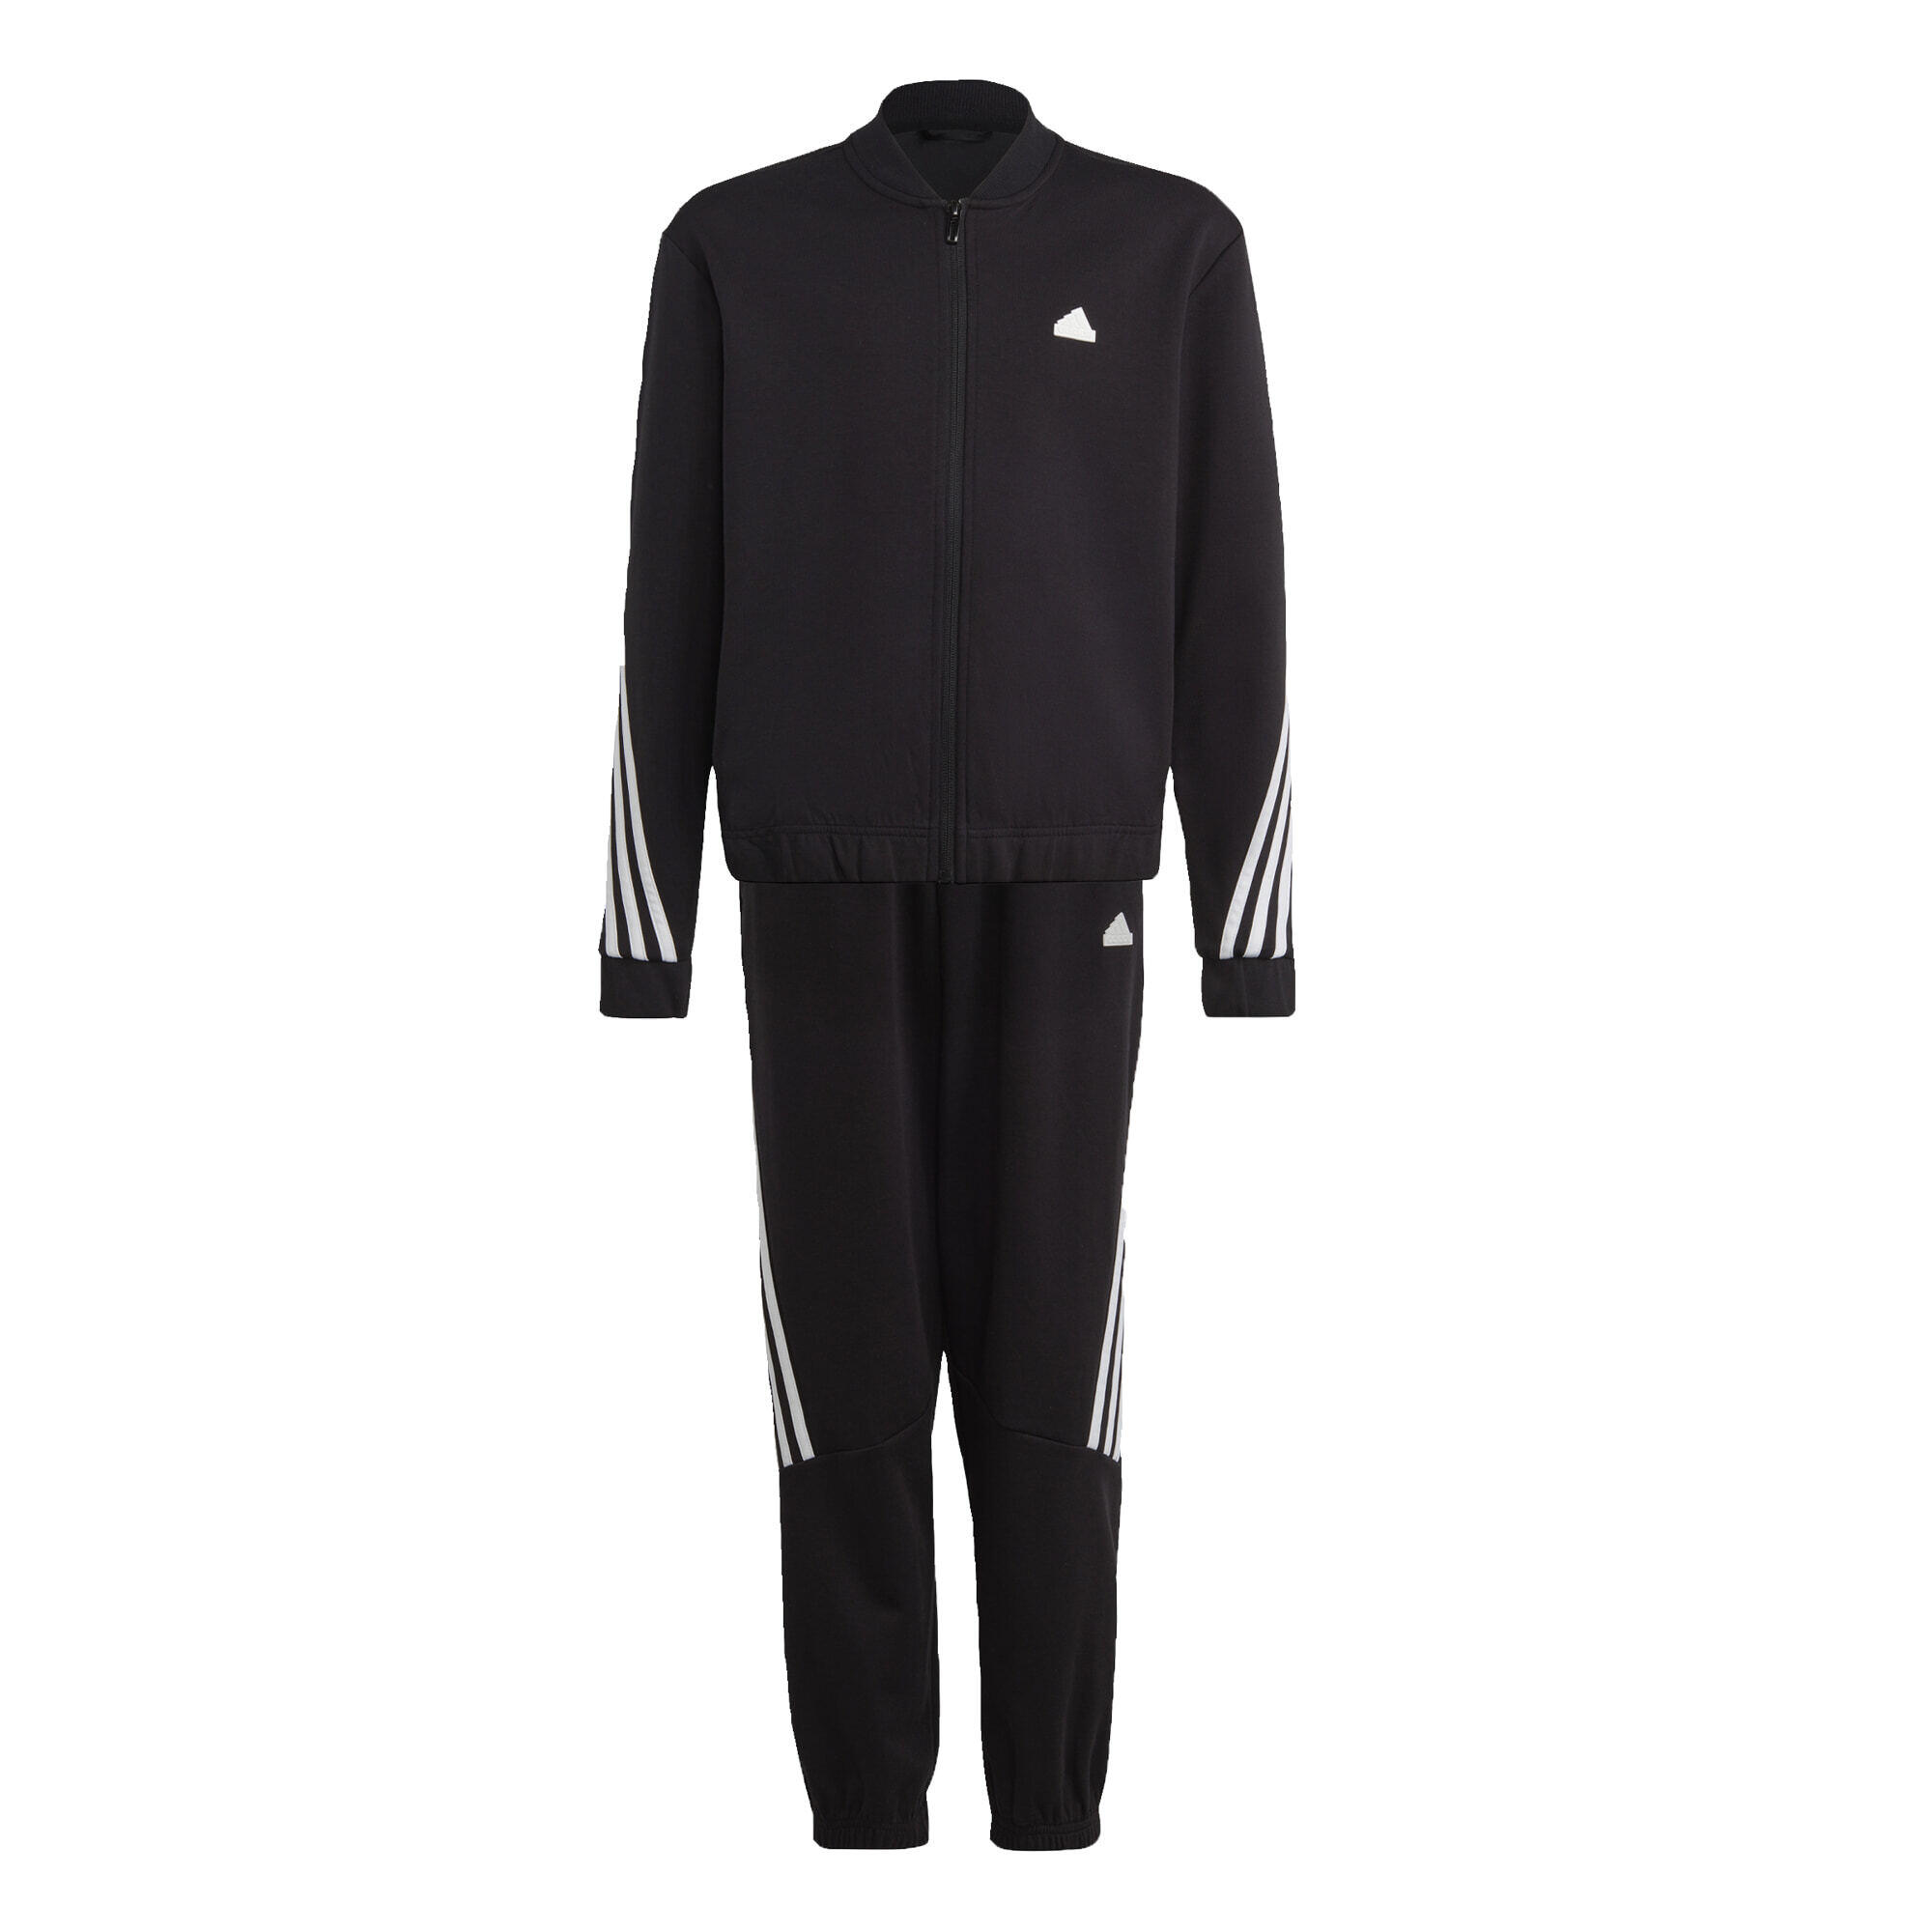 Future Icons 3-Stripes Track Suit 2/7